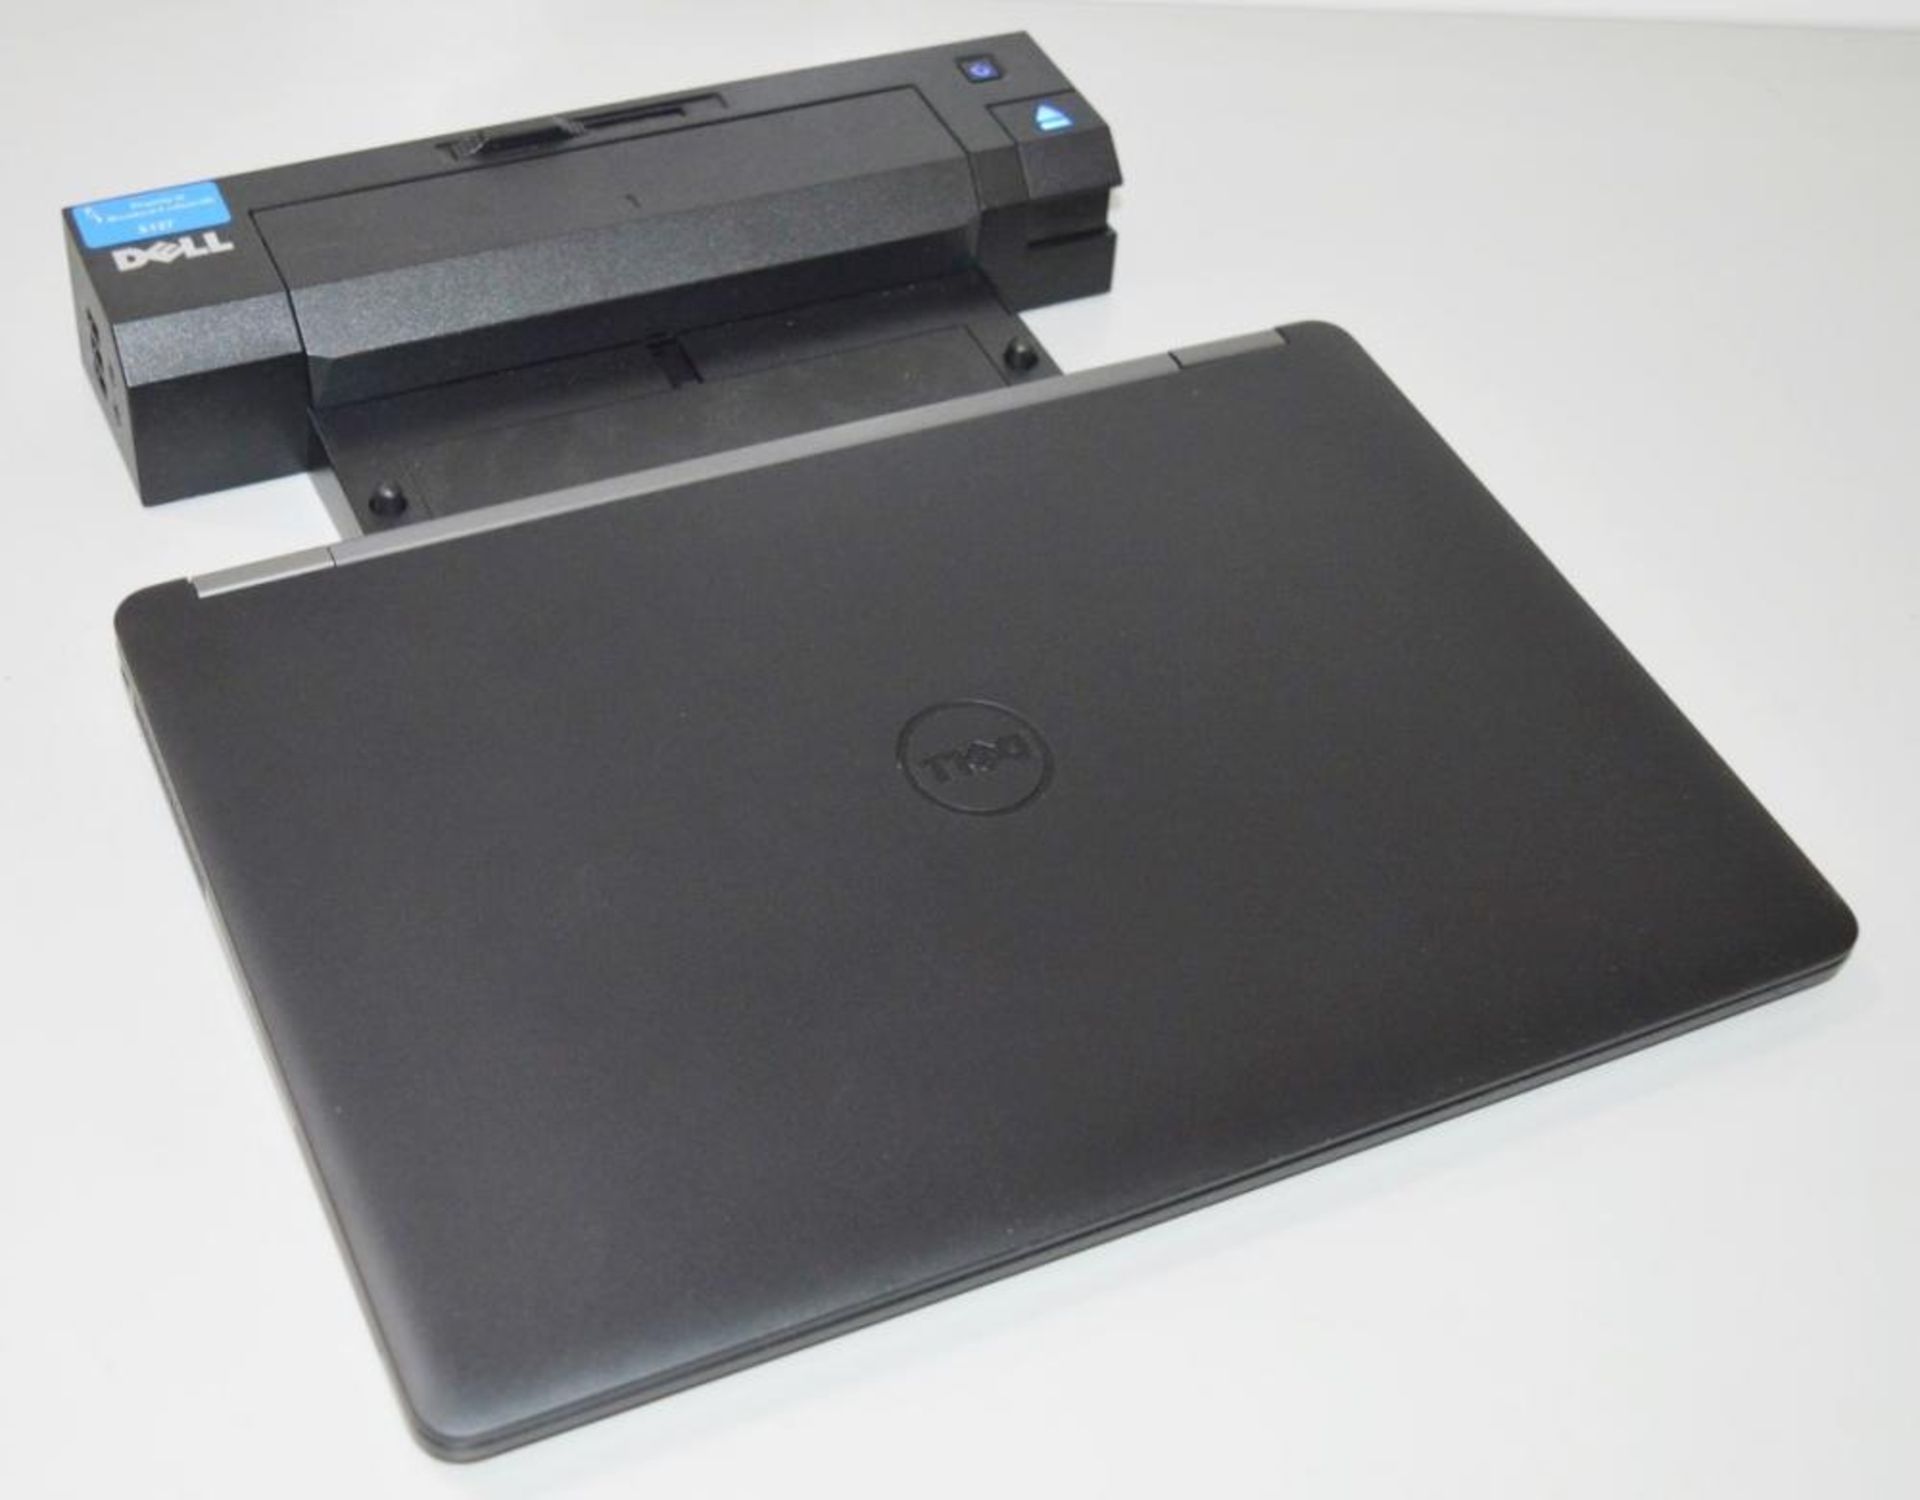 1 x Dell Latitude E7470 Laptop Computer - 14 Inch FHD Screen - Features Include a 6th Gen Core i7- - Image 5 of 14